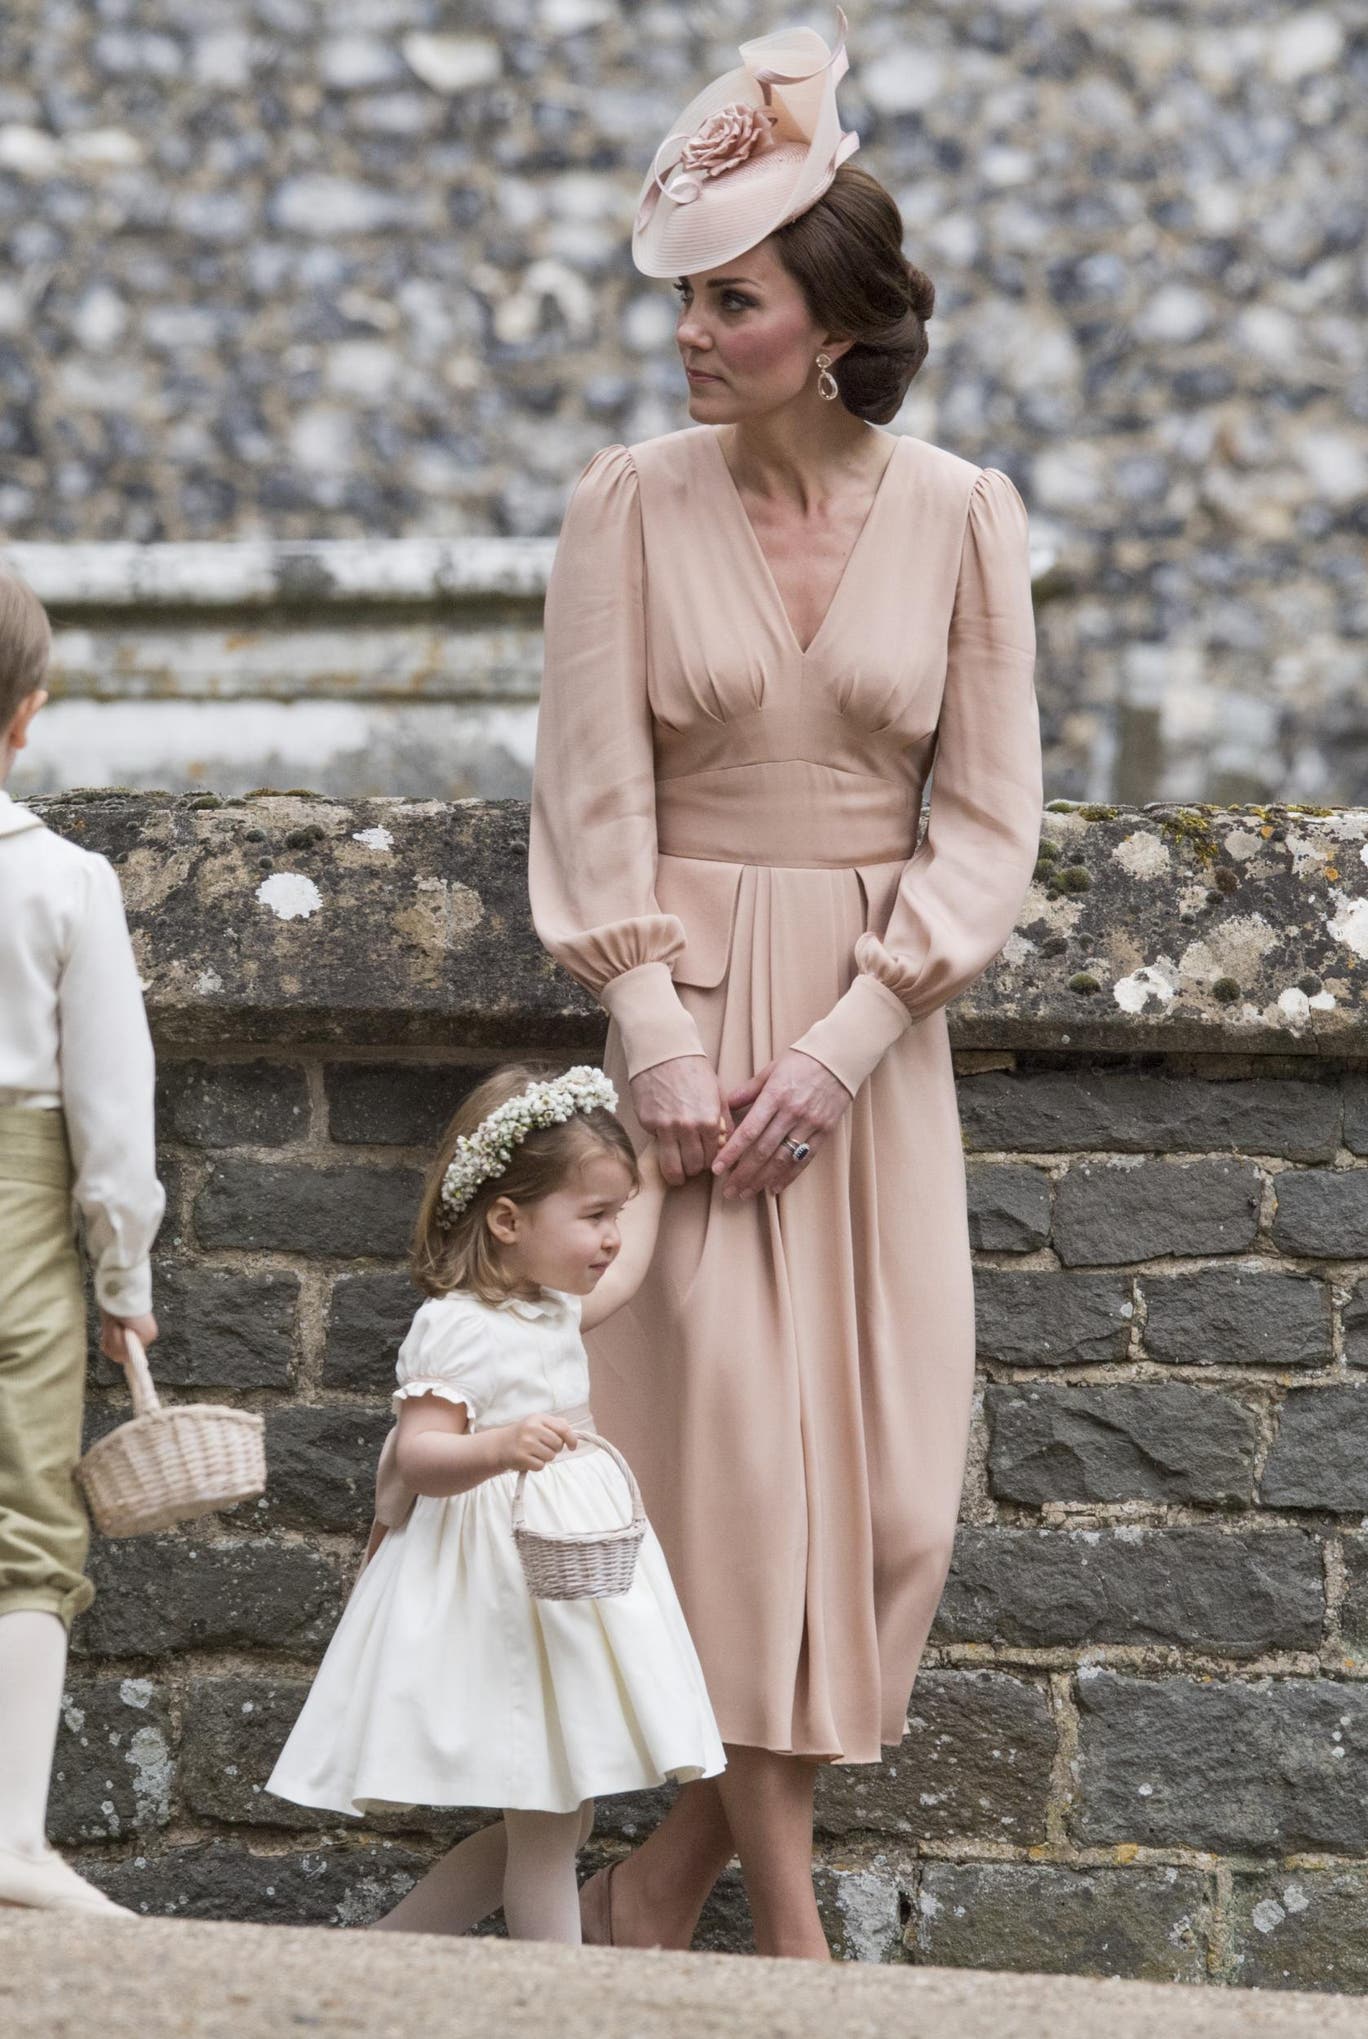 Kate attends Pippa Middleton’s wedding